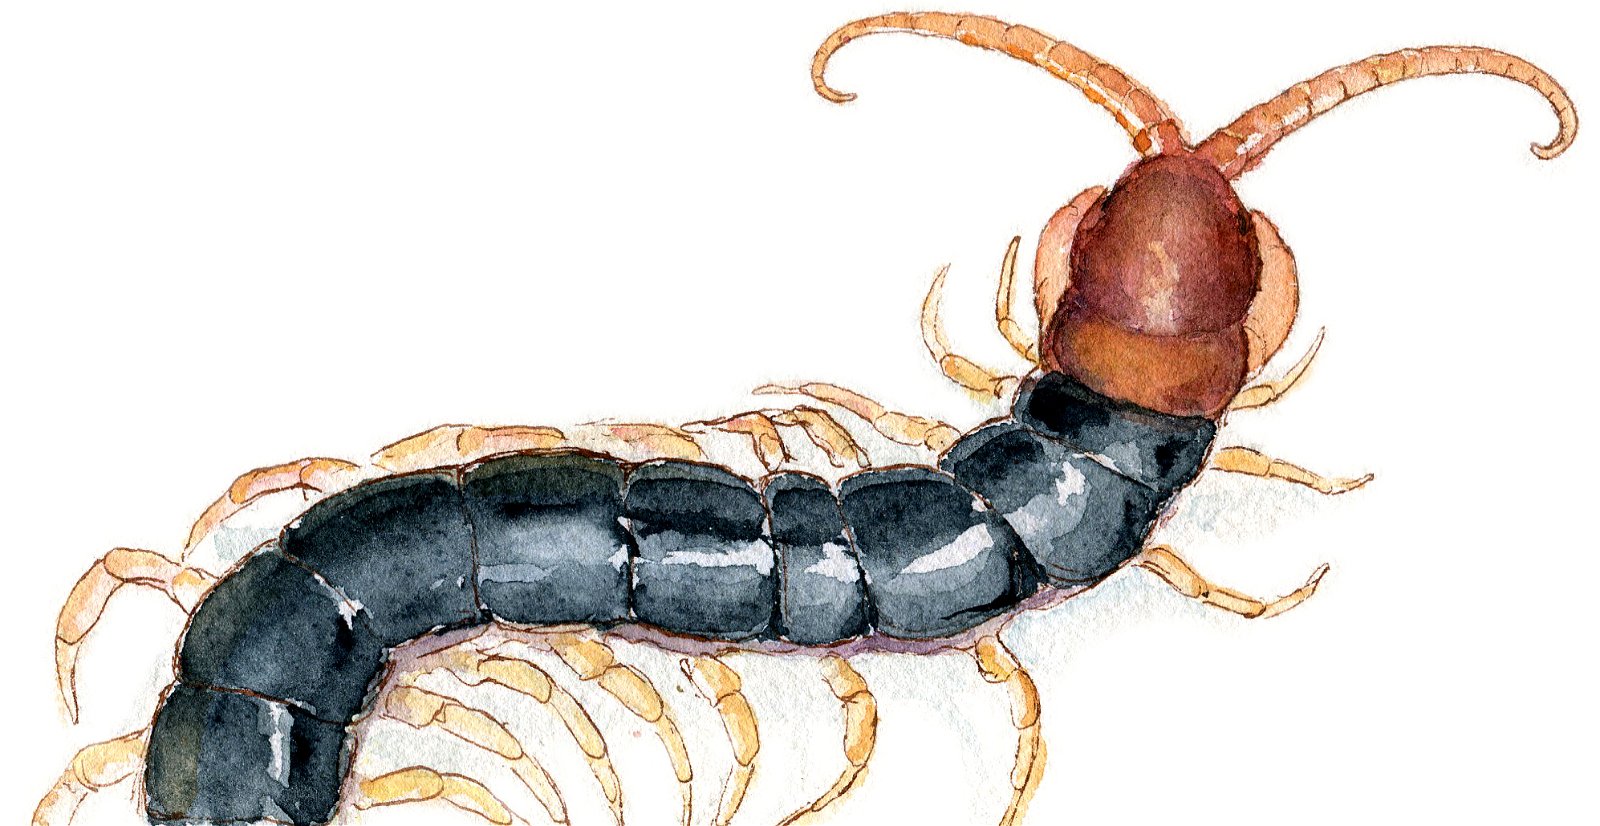 Chinese Red-Headed Centipede